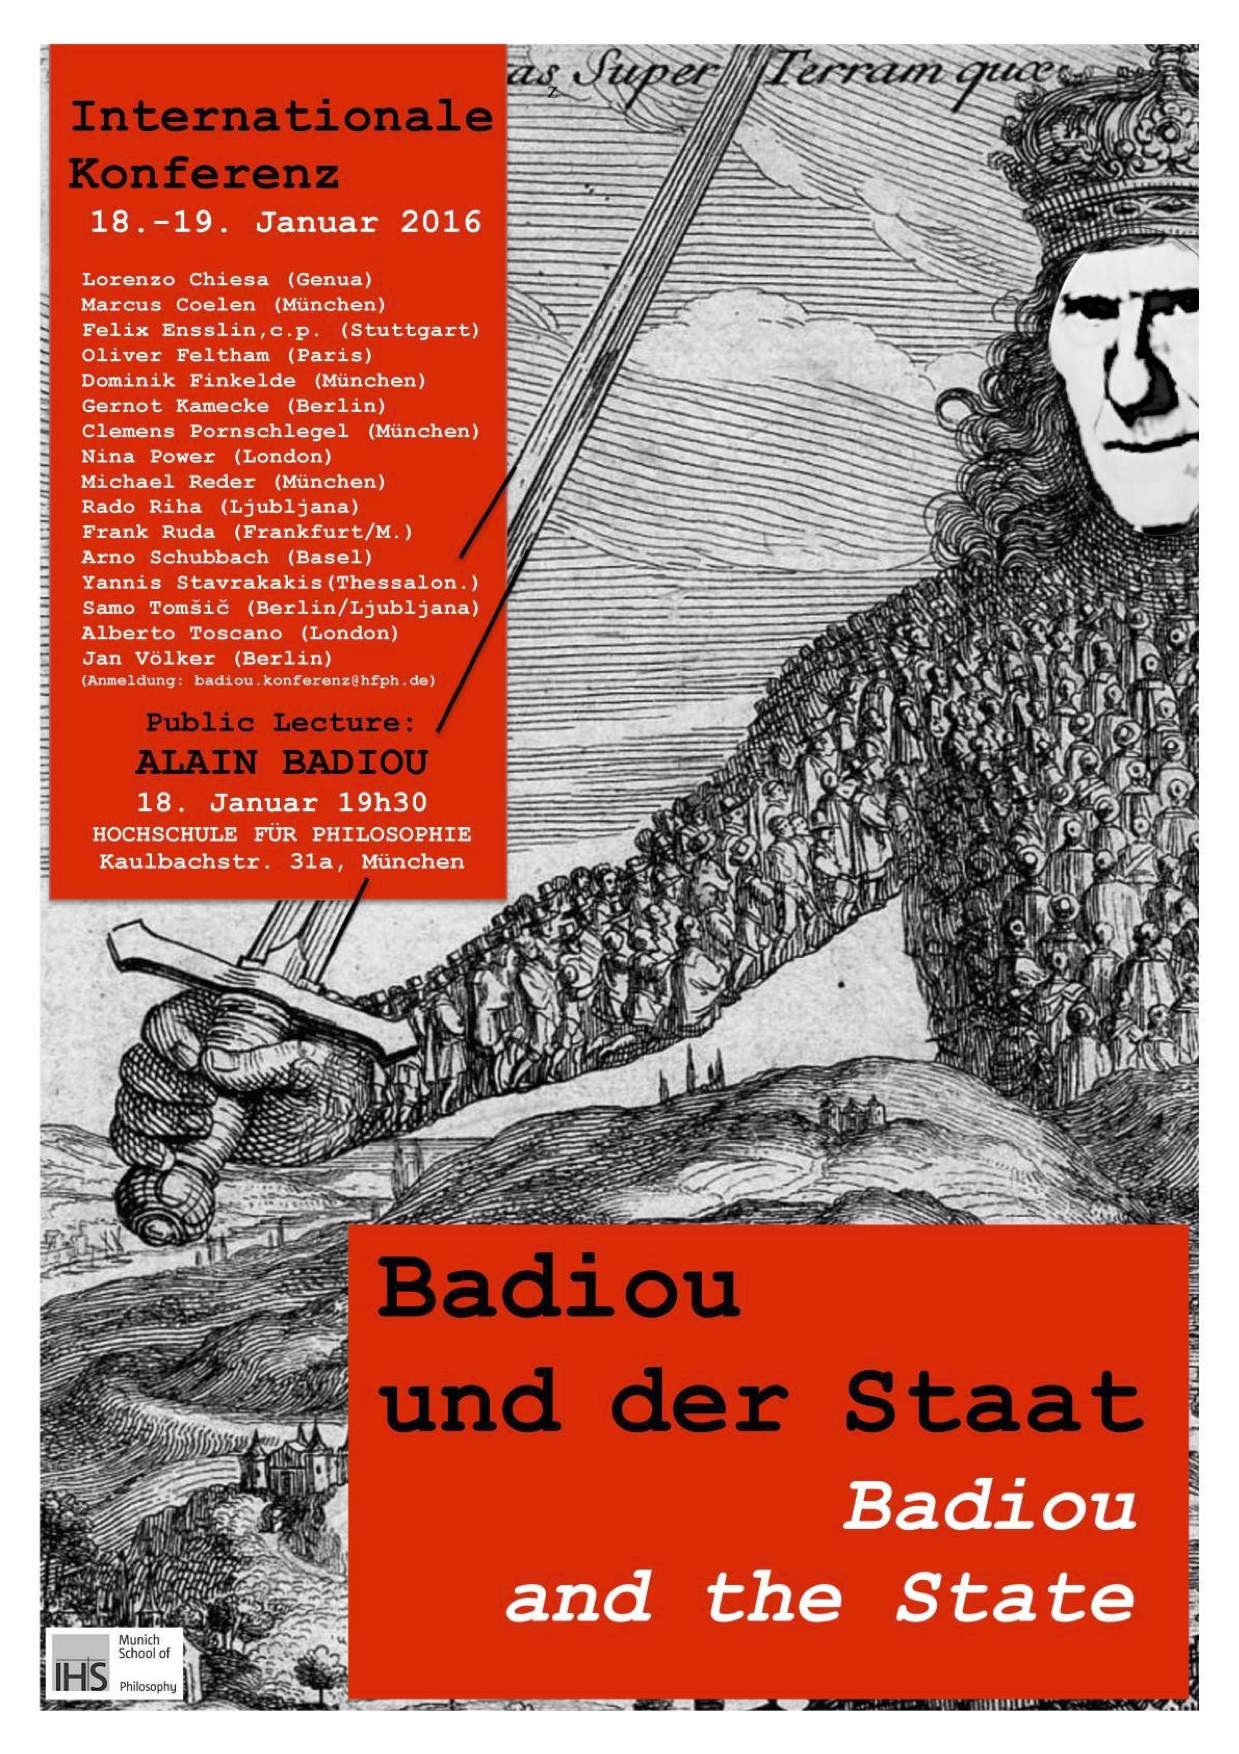 Badiou and the State - Poster k.jpg